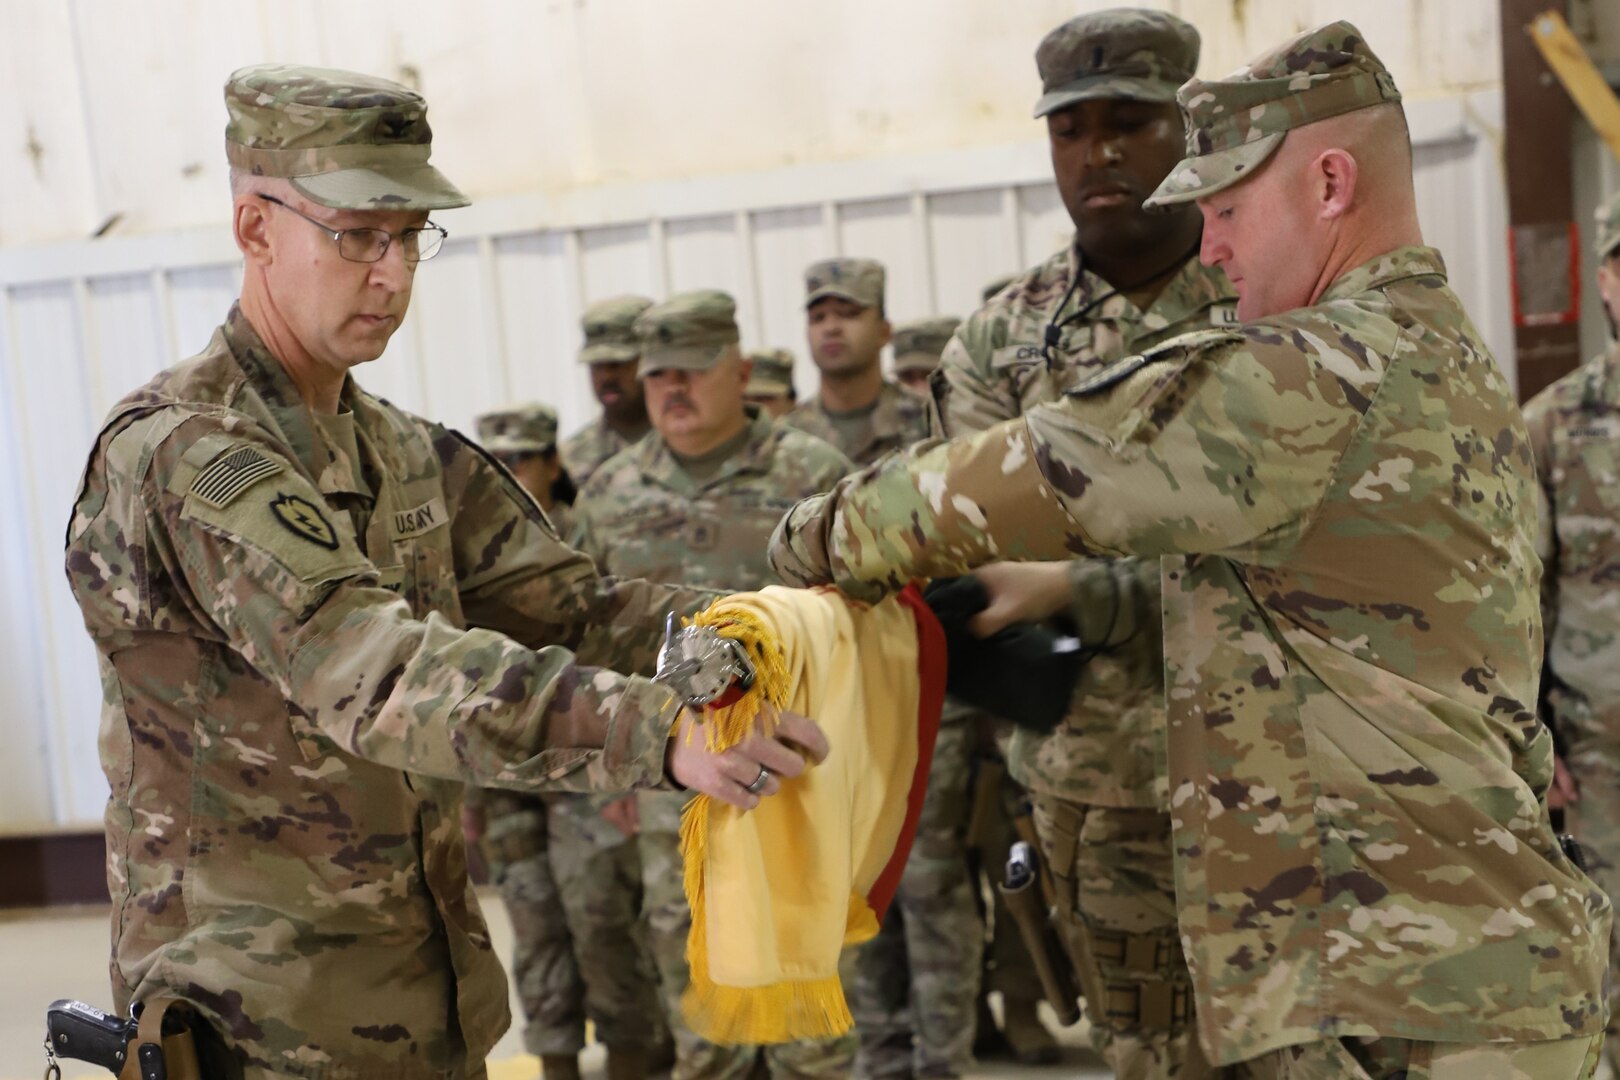 329th Regional Support Group Headquarters moves from Iraq to Kuwait